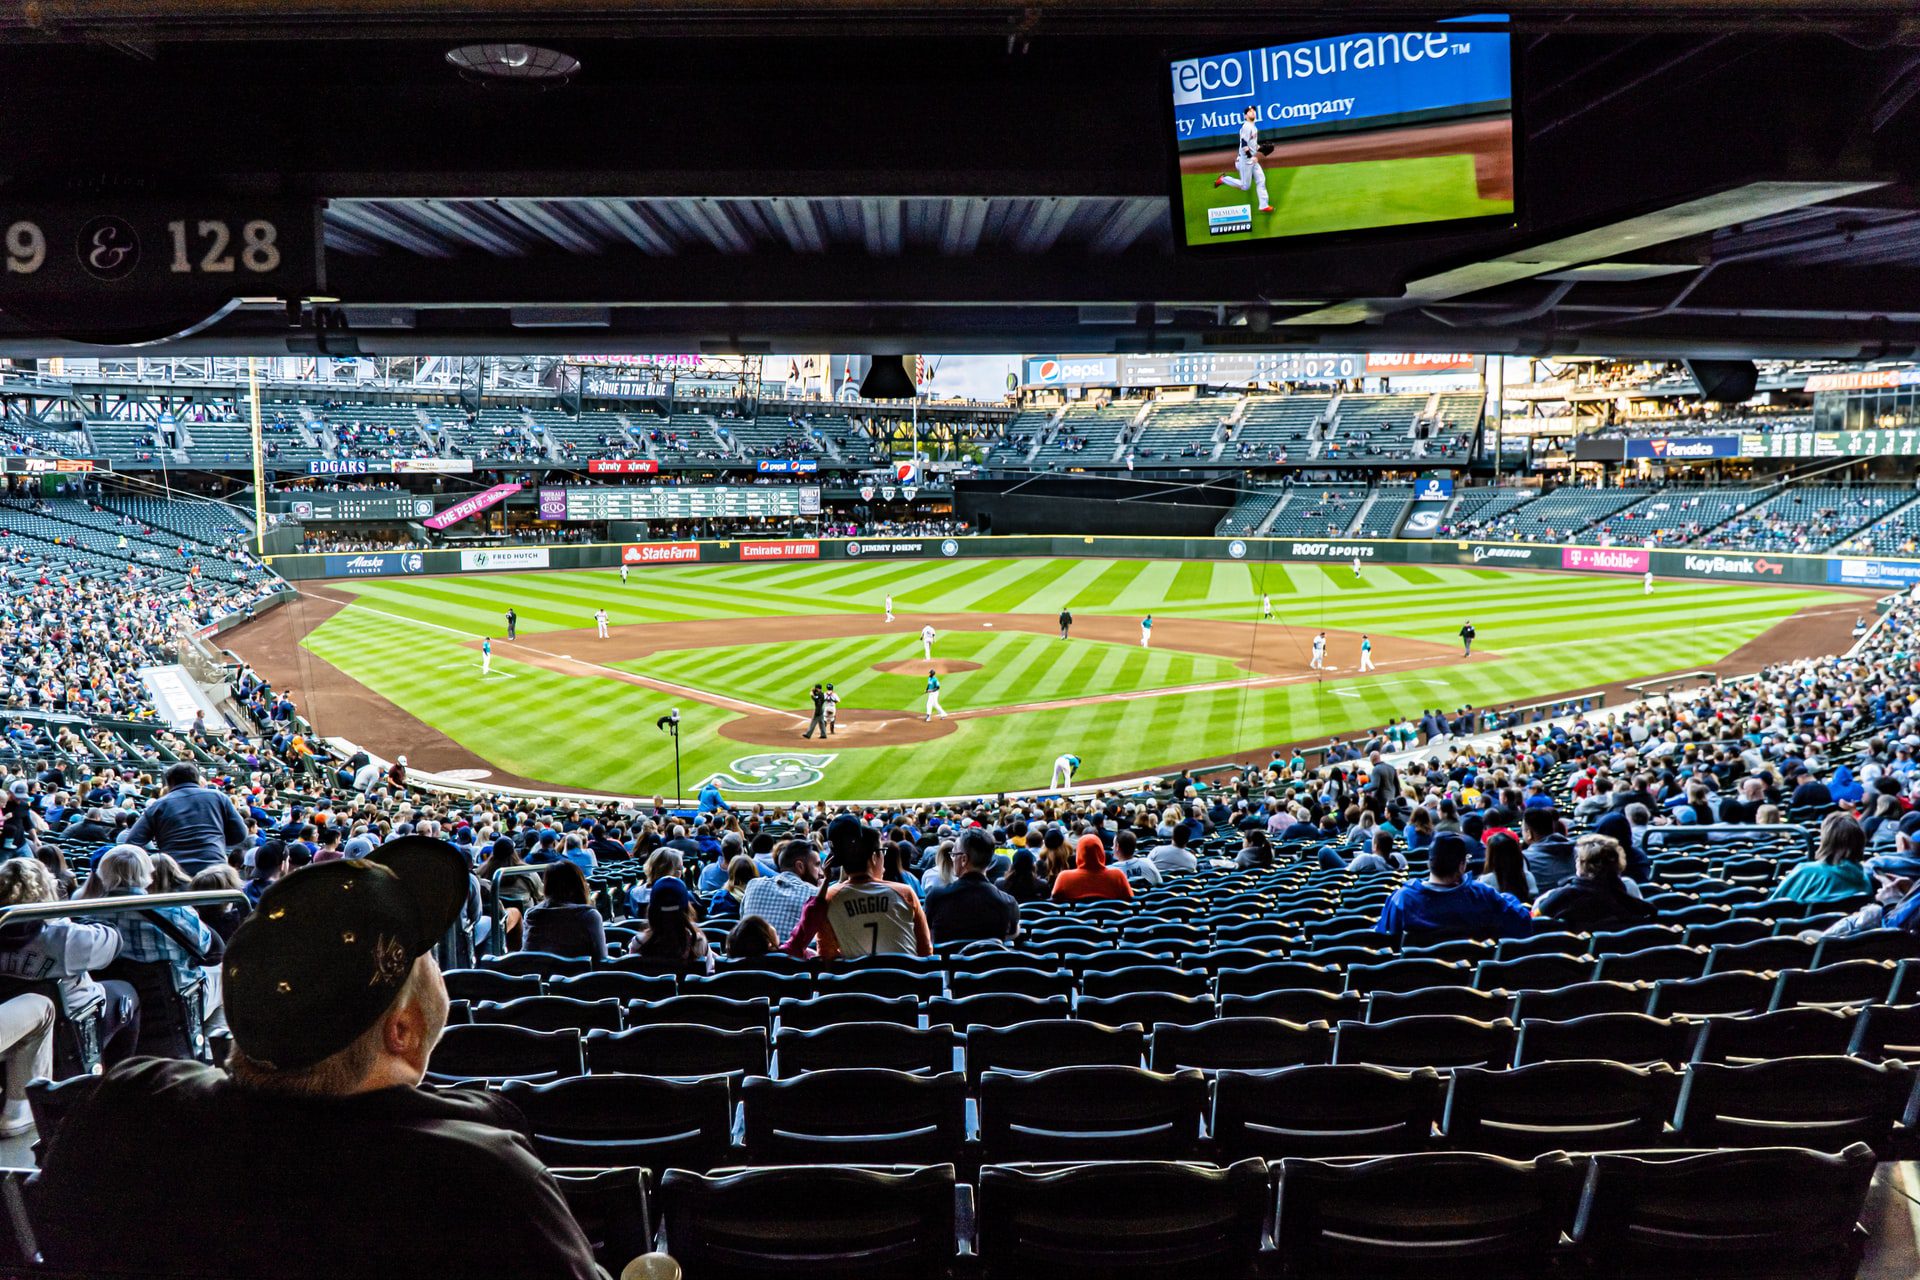 T-Mobile Park during a Mariners home game. Fans watch the game taking place sitting in the lower seating area, on a sunny day.